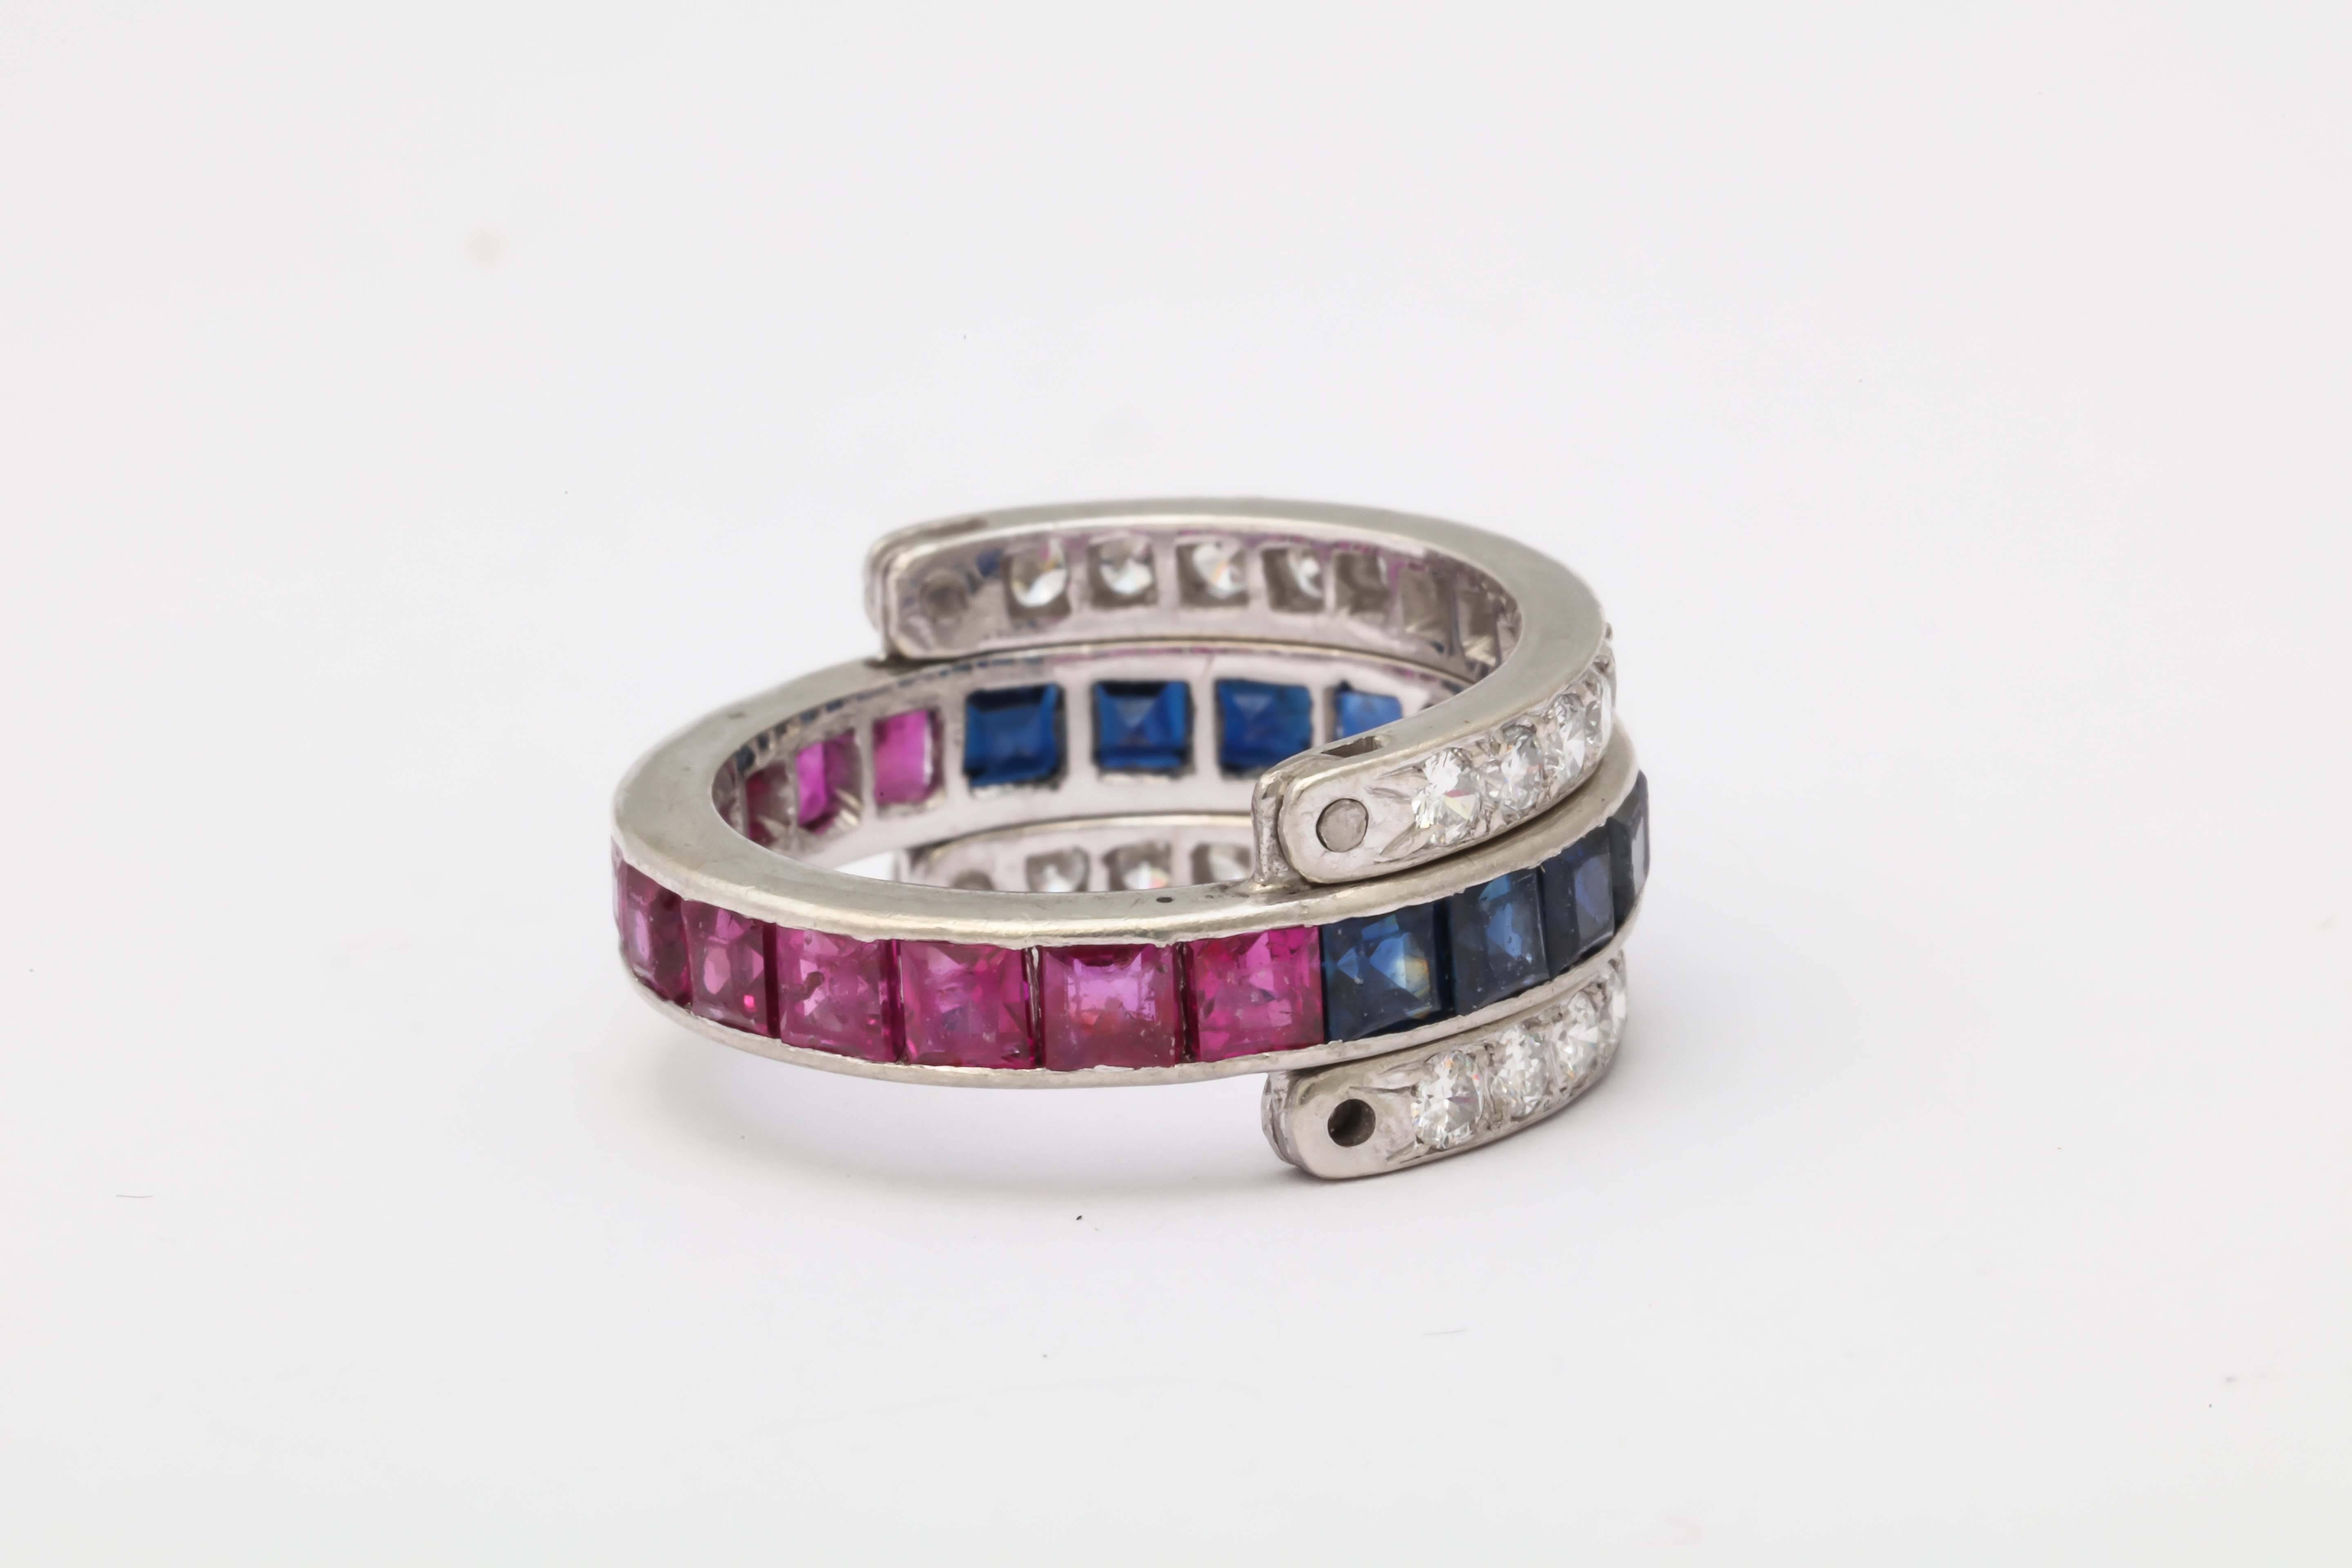 One Ladies Band Consisting Of 12 Custom Cut Square Cut Sapphires Weighing Approximately 1 carat Total Weight And Further Designed With 12 Custom Cut Beautiful Color Square Rubies Weighing Approximately 1 Carat Total Weight. Further Decorated With 2